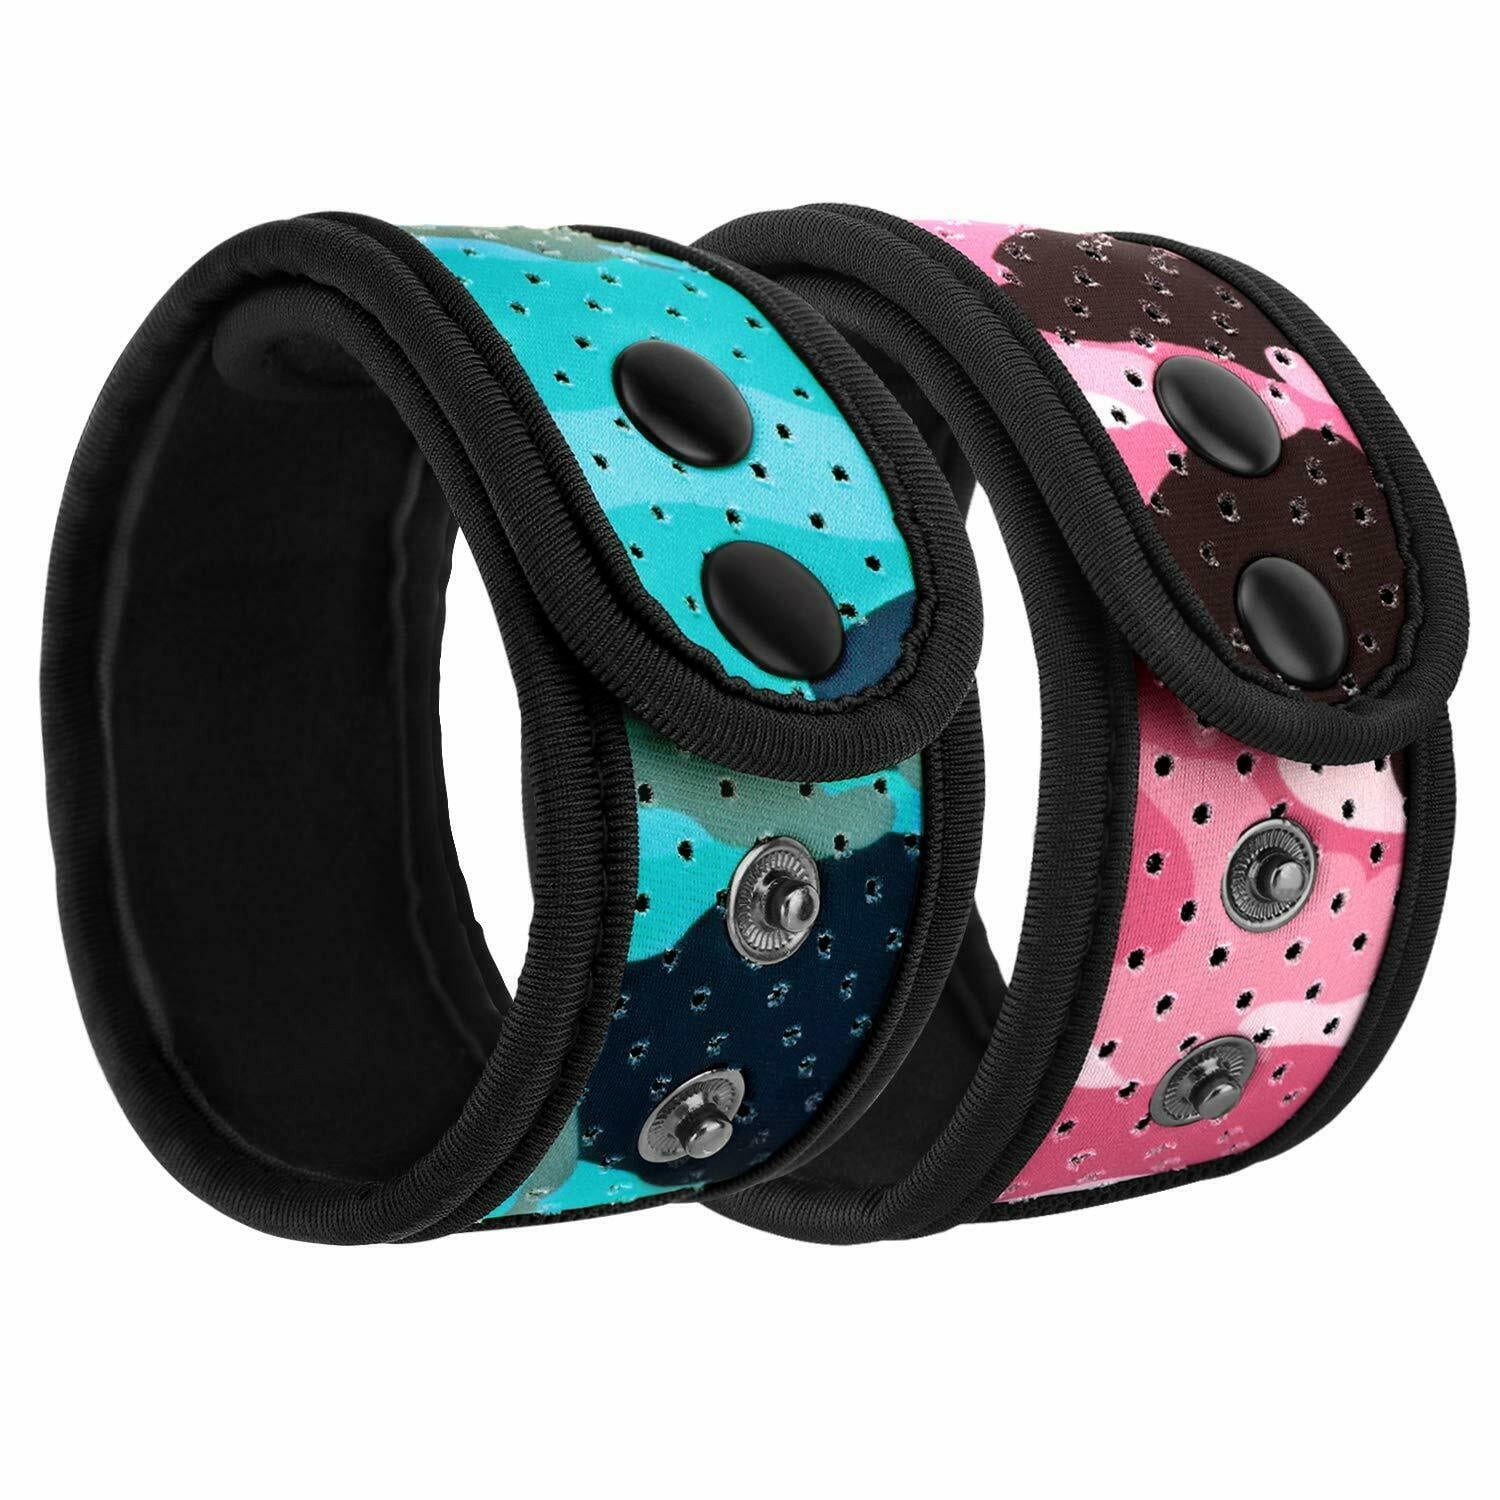 MoKo 2Pack Sweatproof Fitness Tracker Ankle Band Wristband for Fitbit Flex/Alta, Camouflage Blue + Camouflage Pink